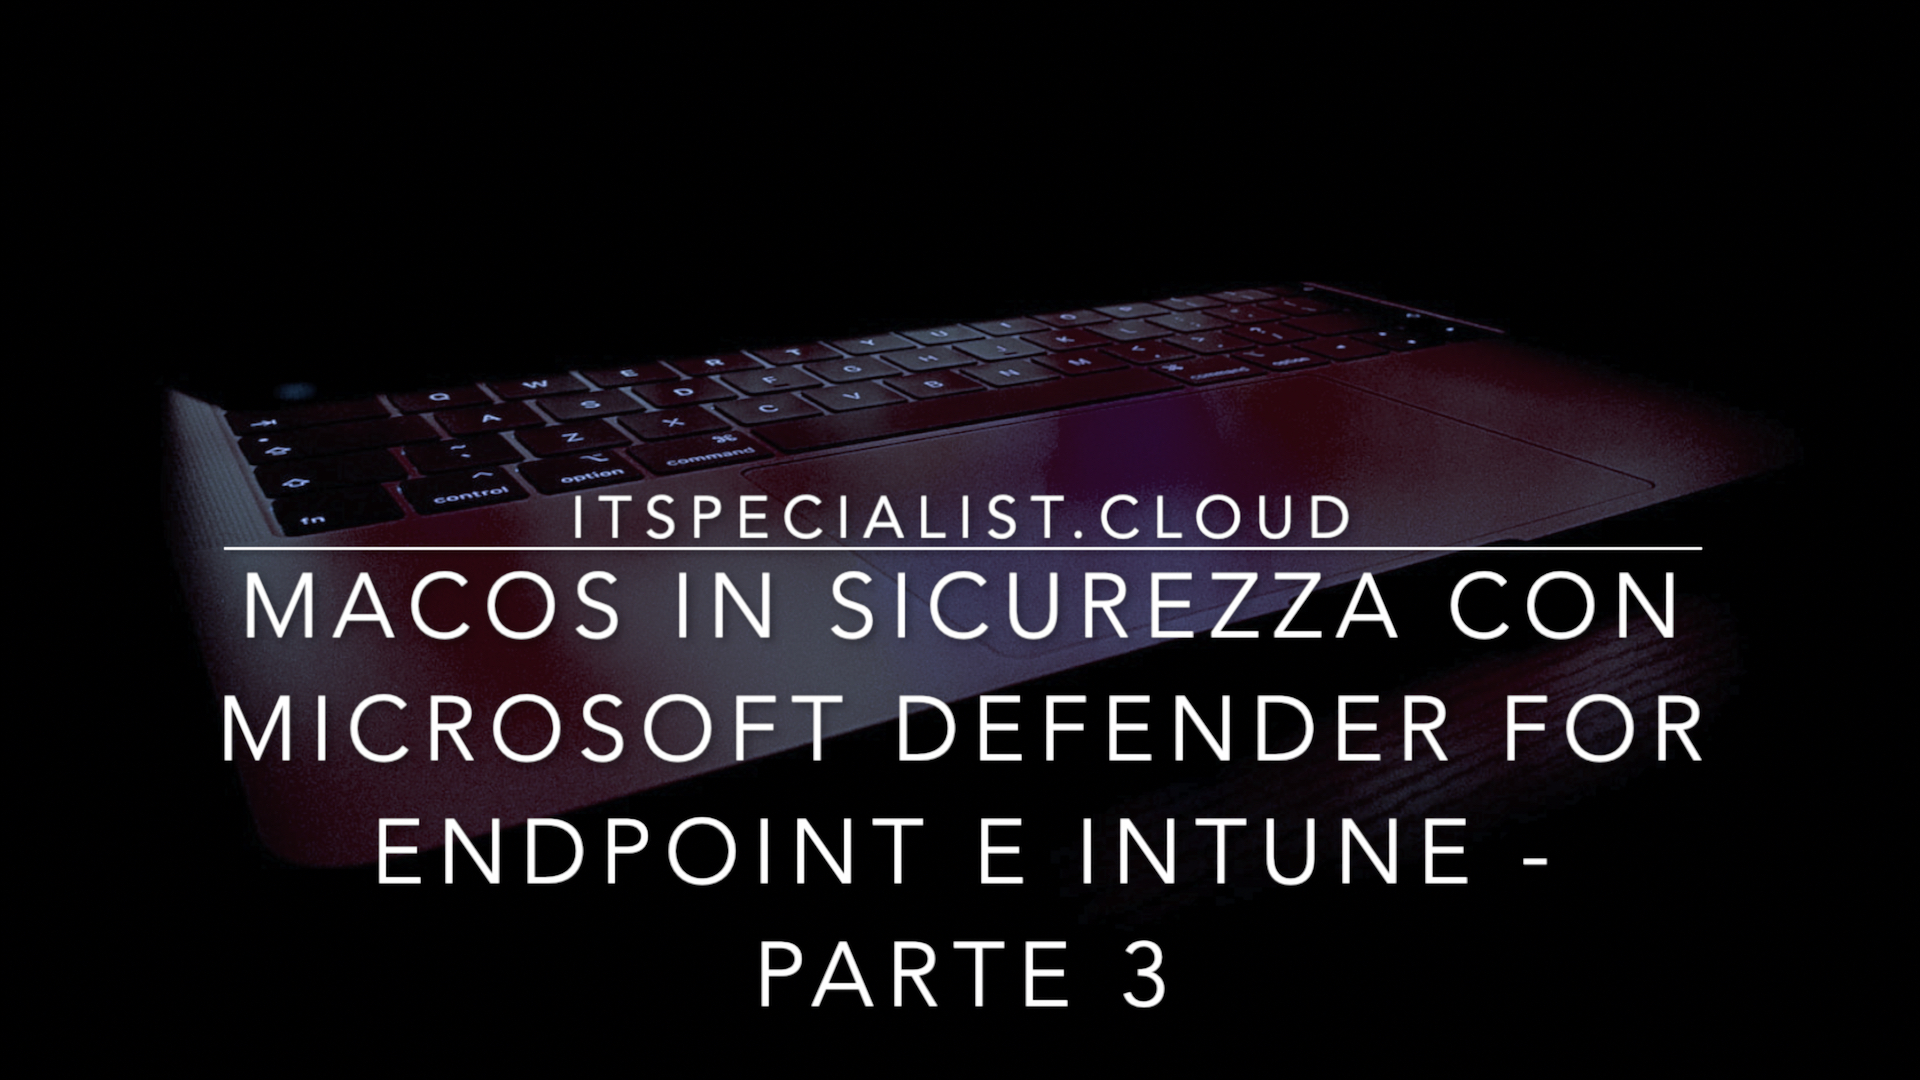 image from macOS in sicurezza con Microsoft Defender for Endpoint - Parte 3